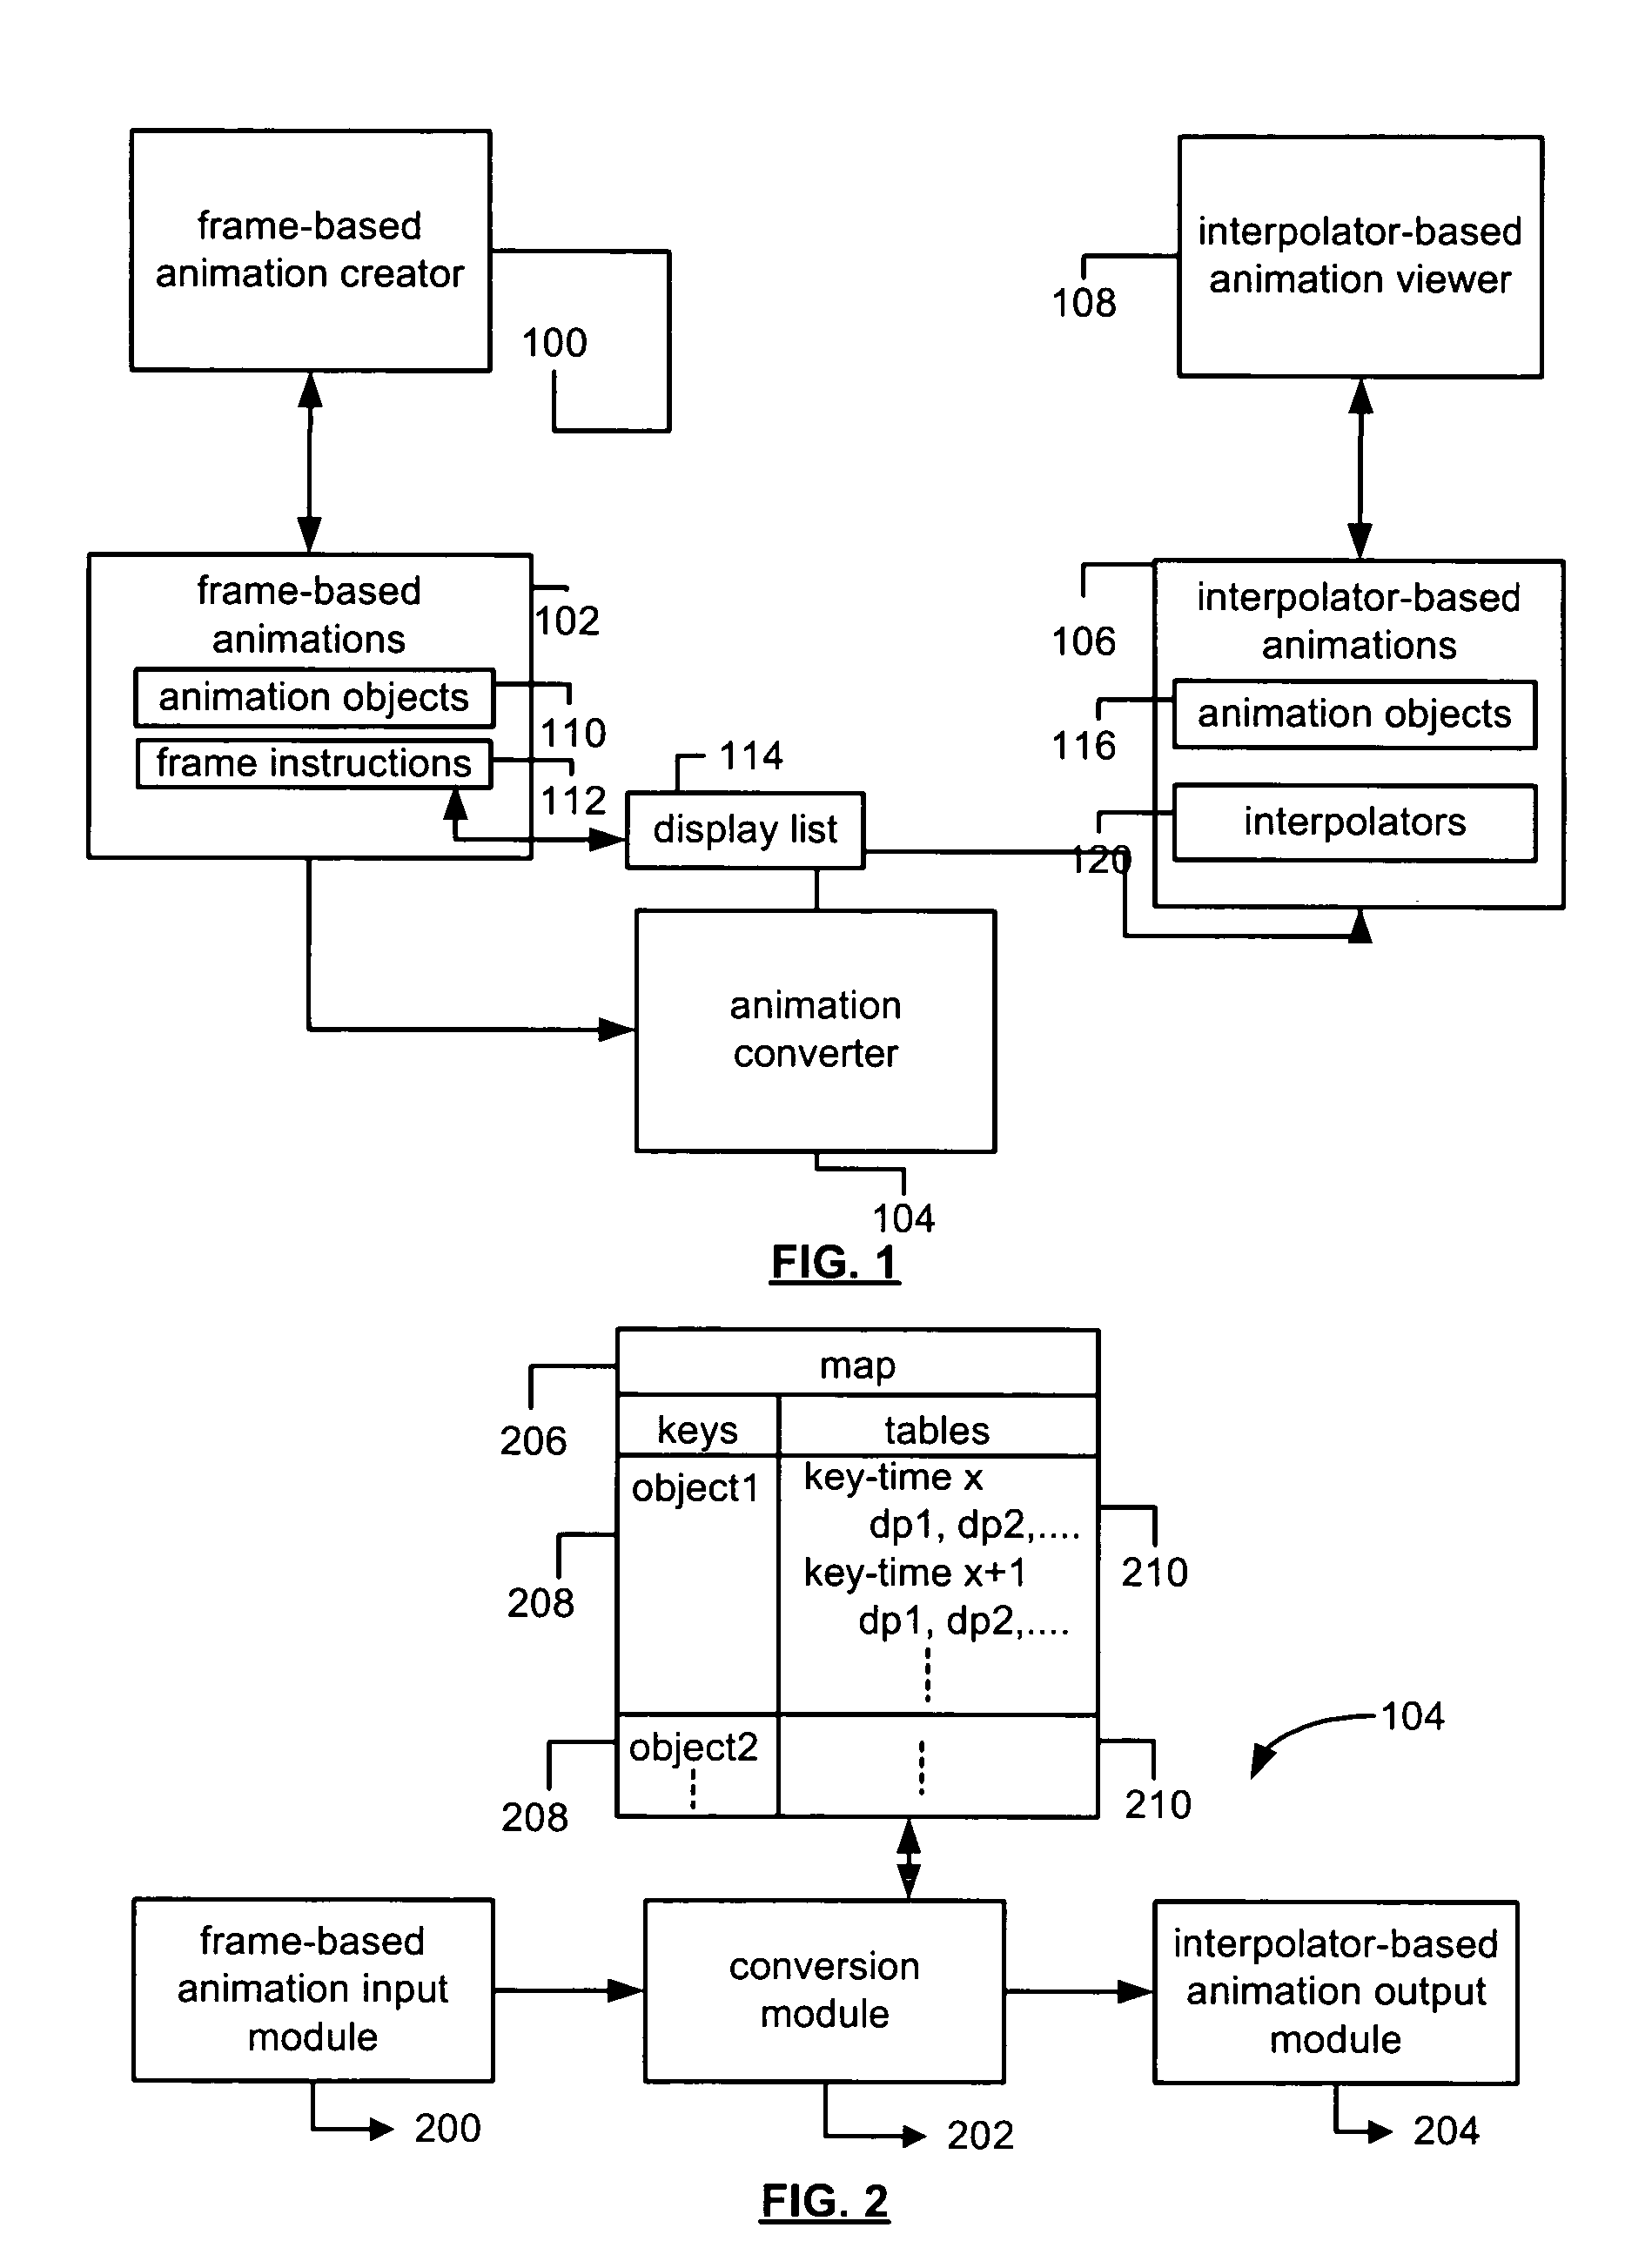 System and method of converting frame-based animations into interpolator-based animations